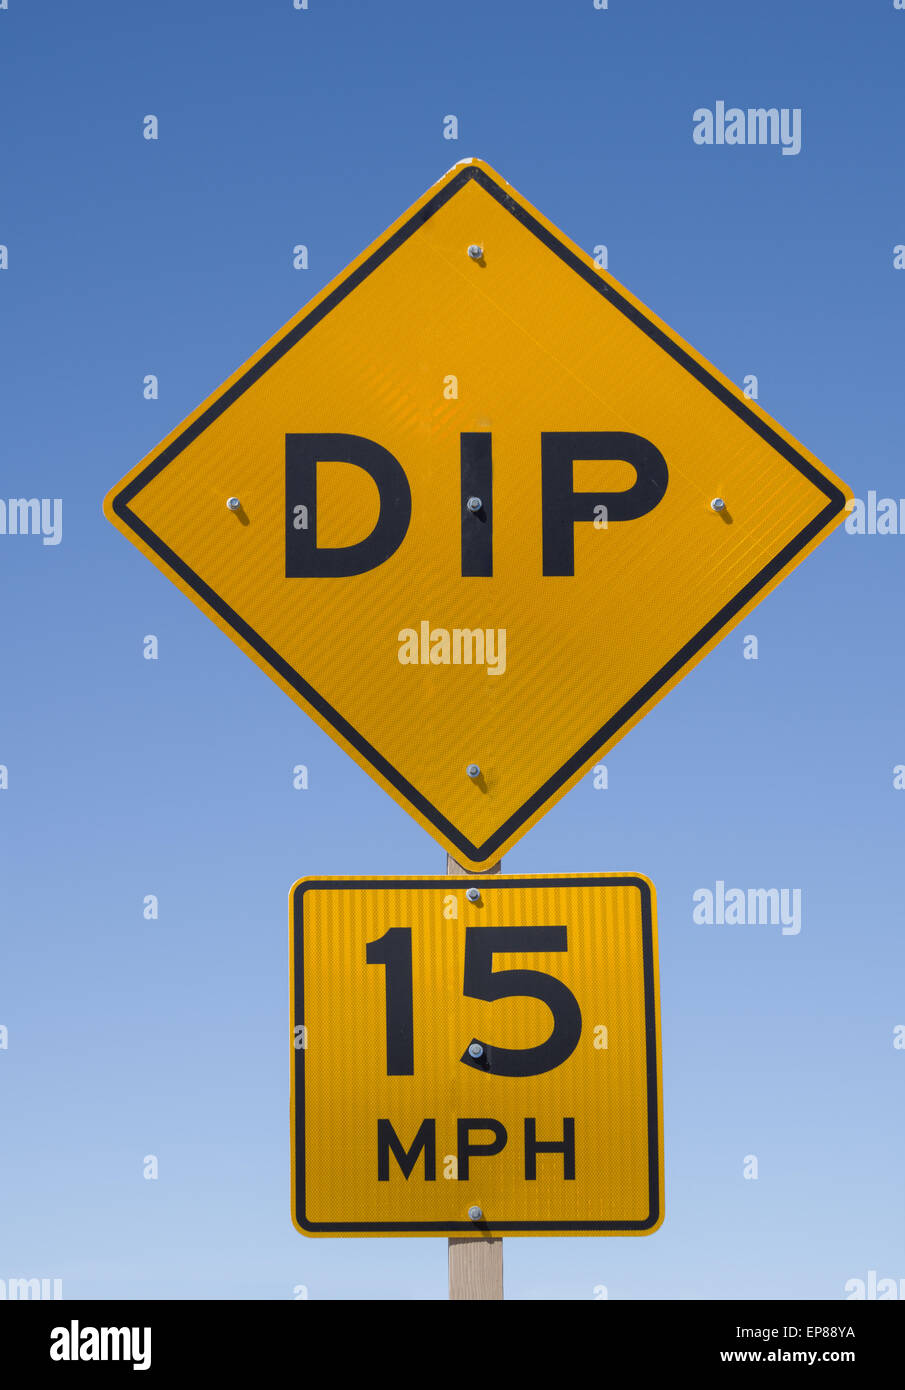 dip 15 mph road sign with blue sky background Stock Photo